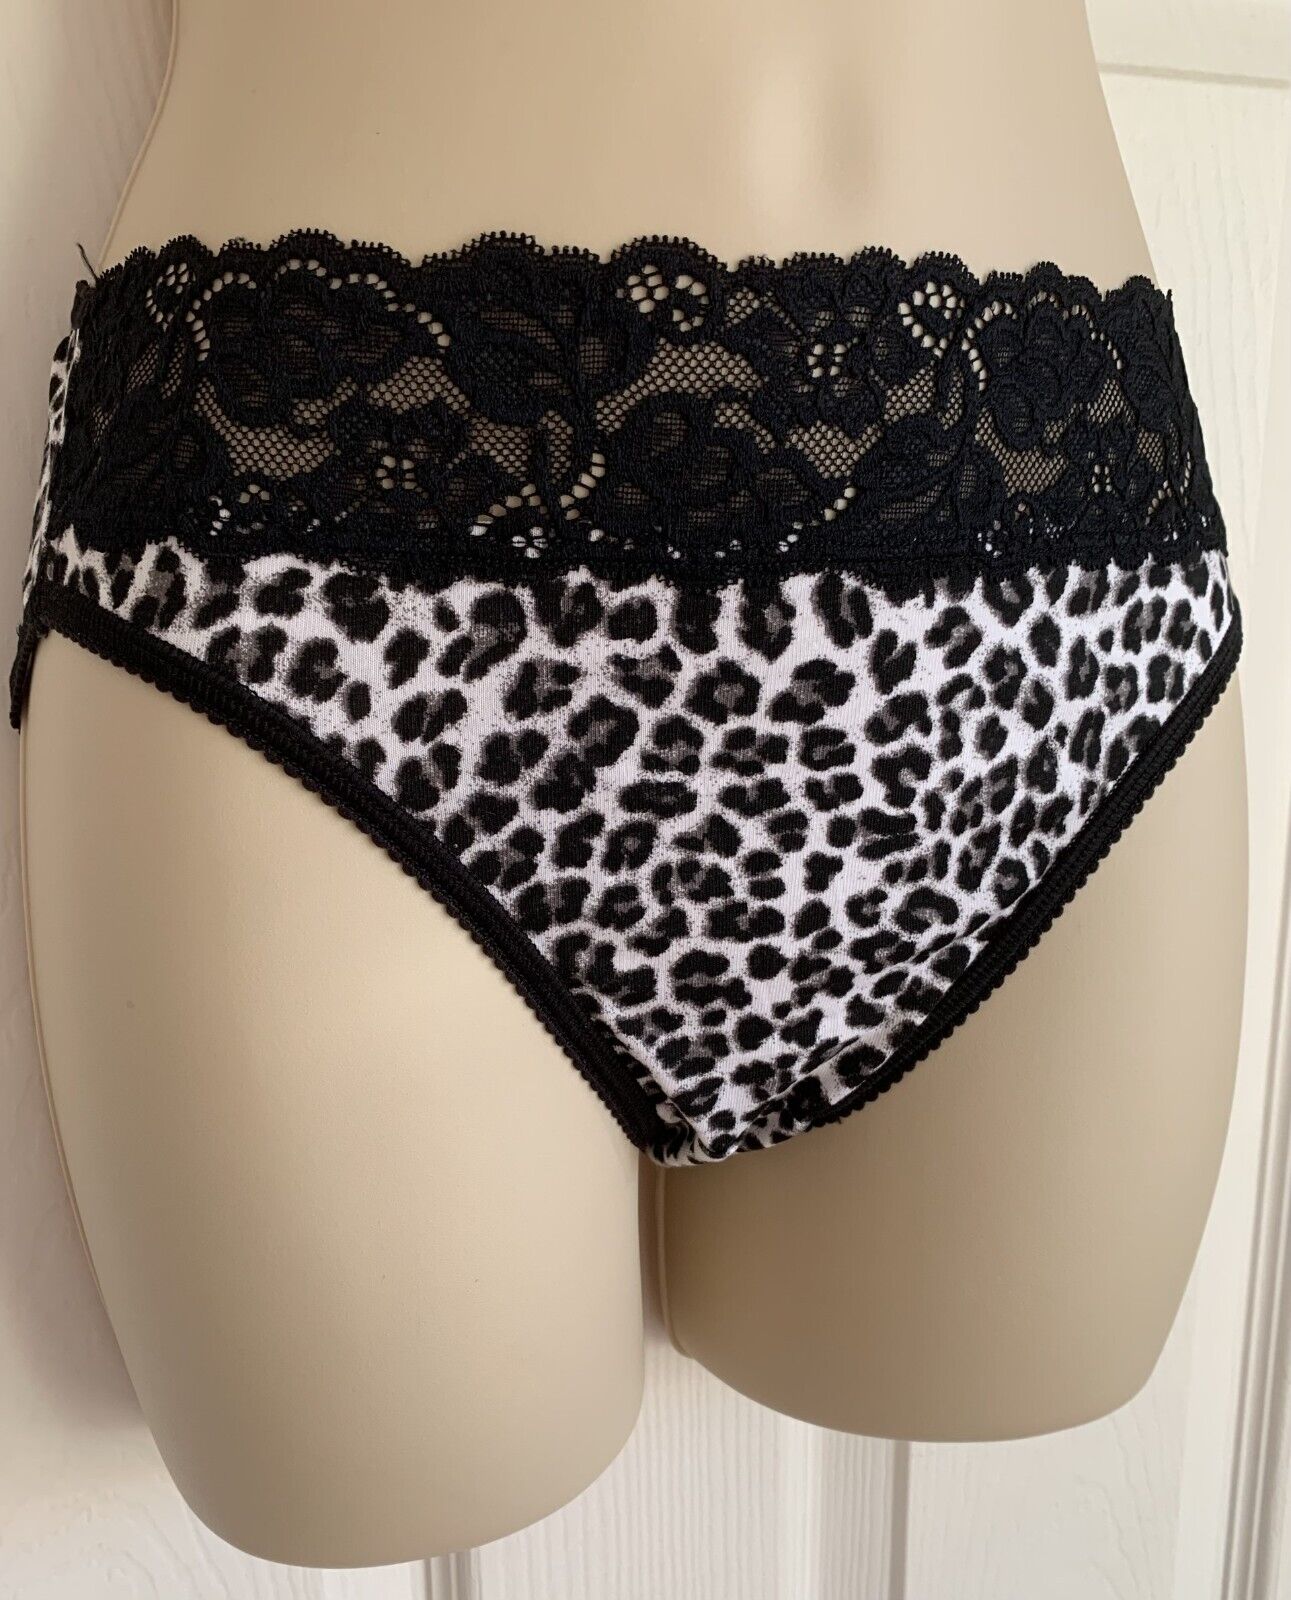 EX M*S Animal Print Cotton Rich Embroidery Lace Trim High Leg Knickers 10-22